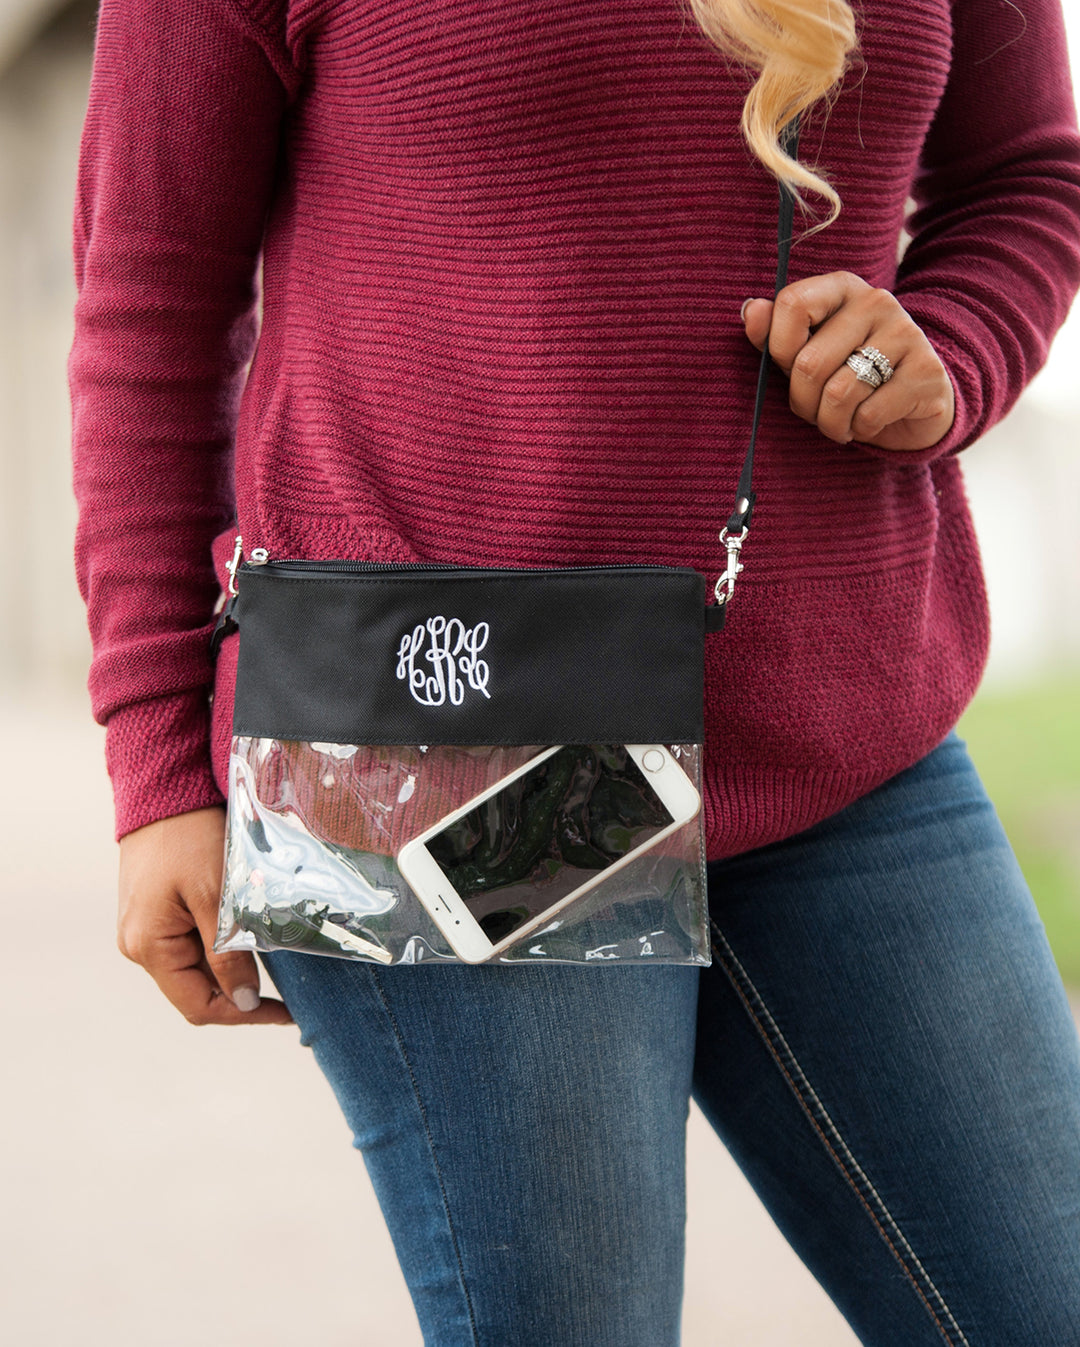 Clear Stadium Friendly Gameday Cross Body Purse - 7 Colors